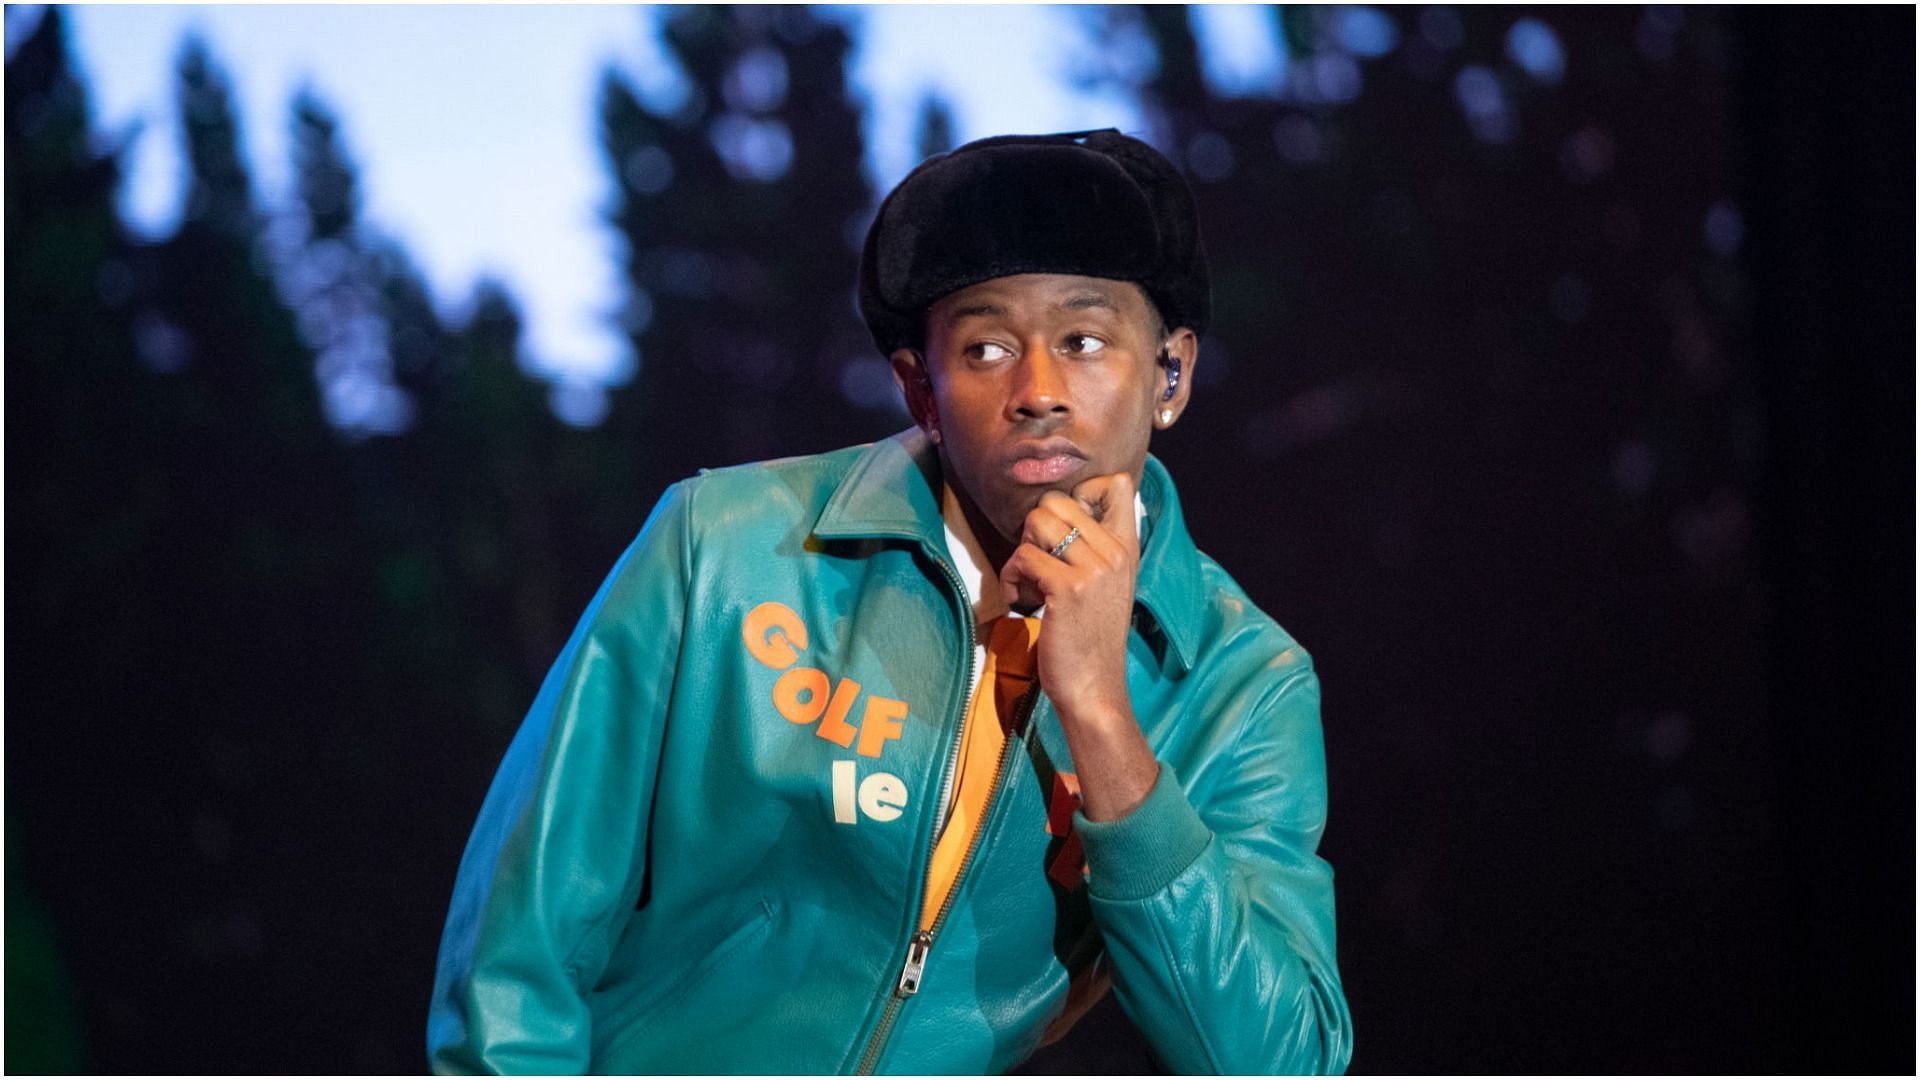 Tyler, The Creator recently talked about changing his stage name (Image via Allen J. Schaben/Getty Images)